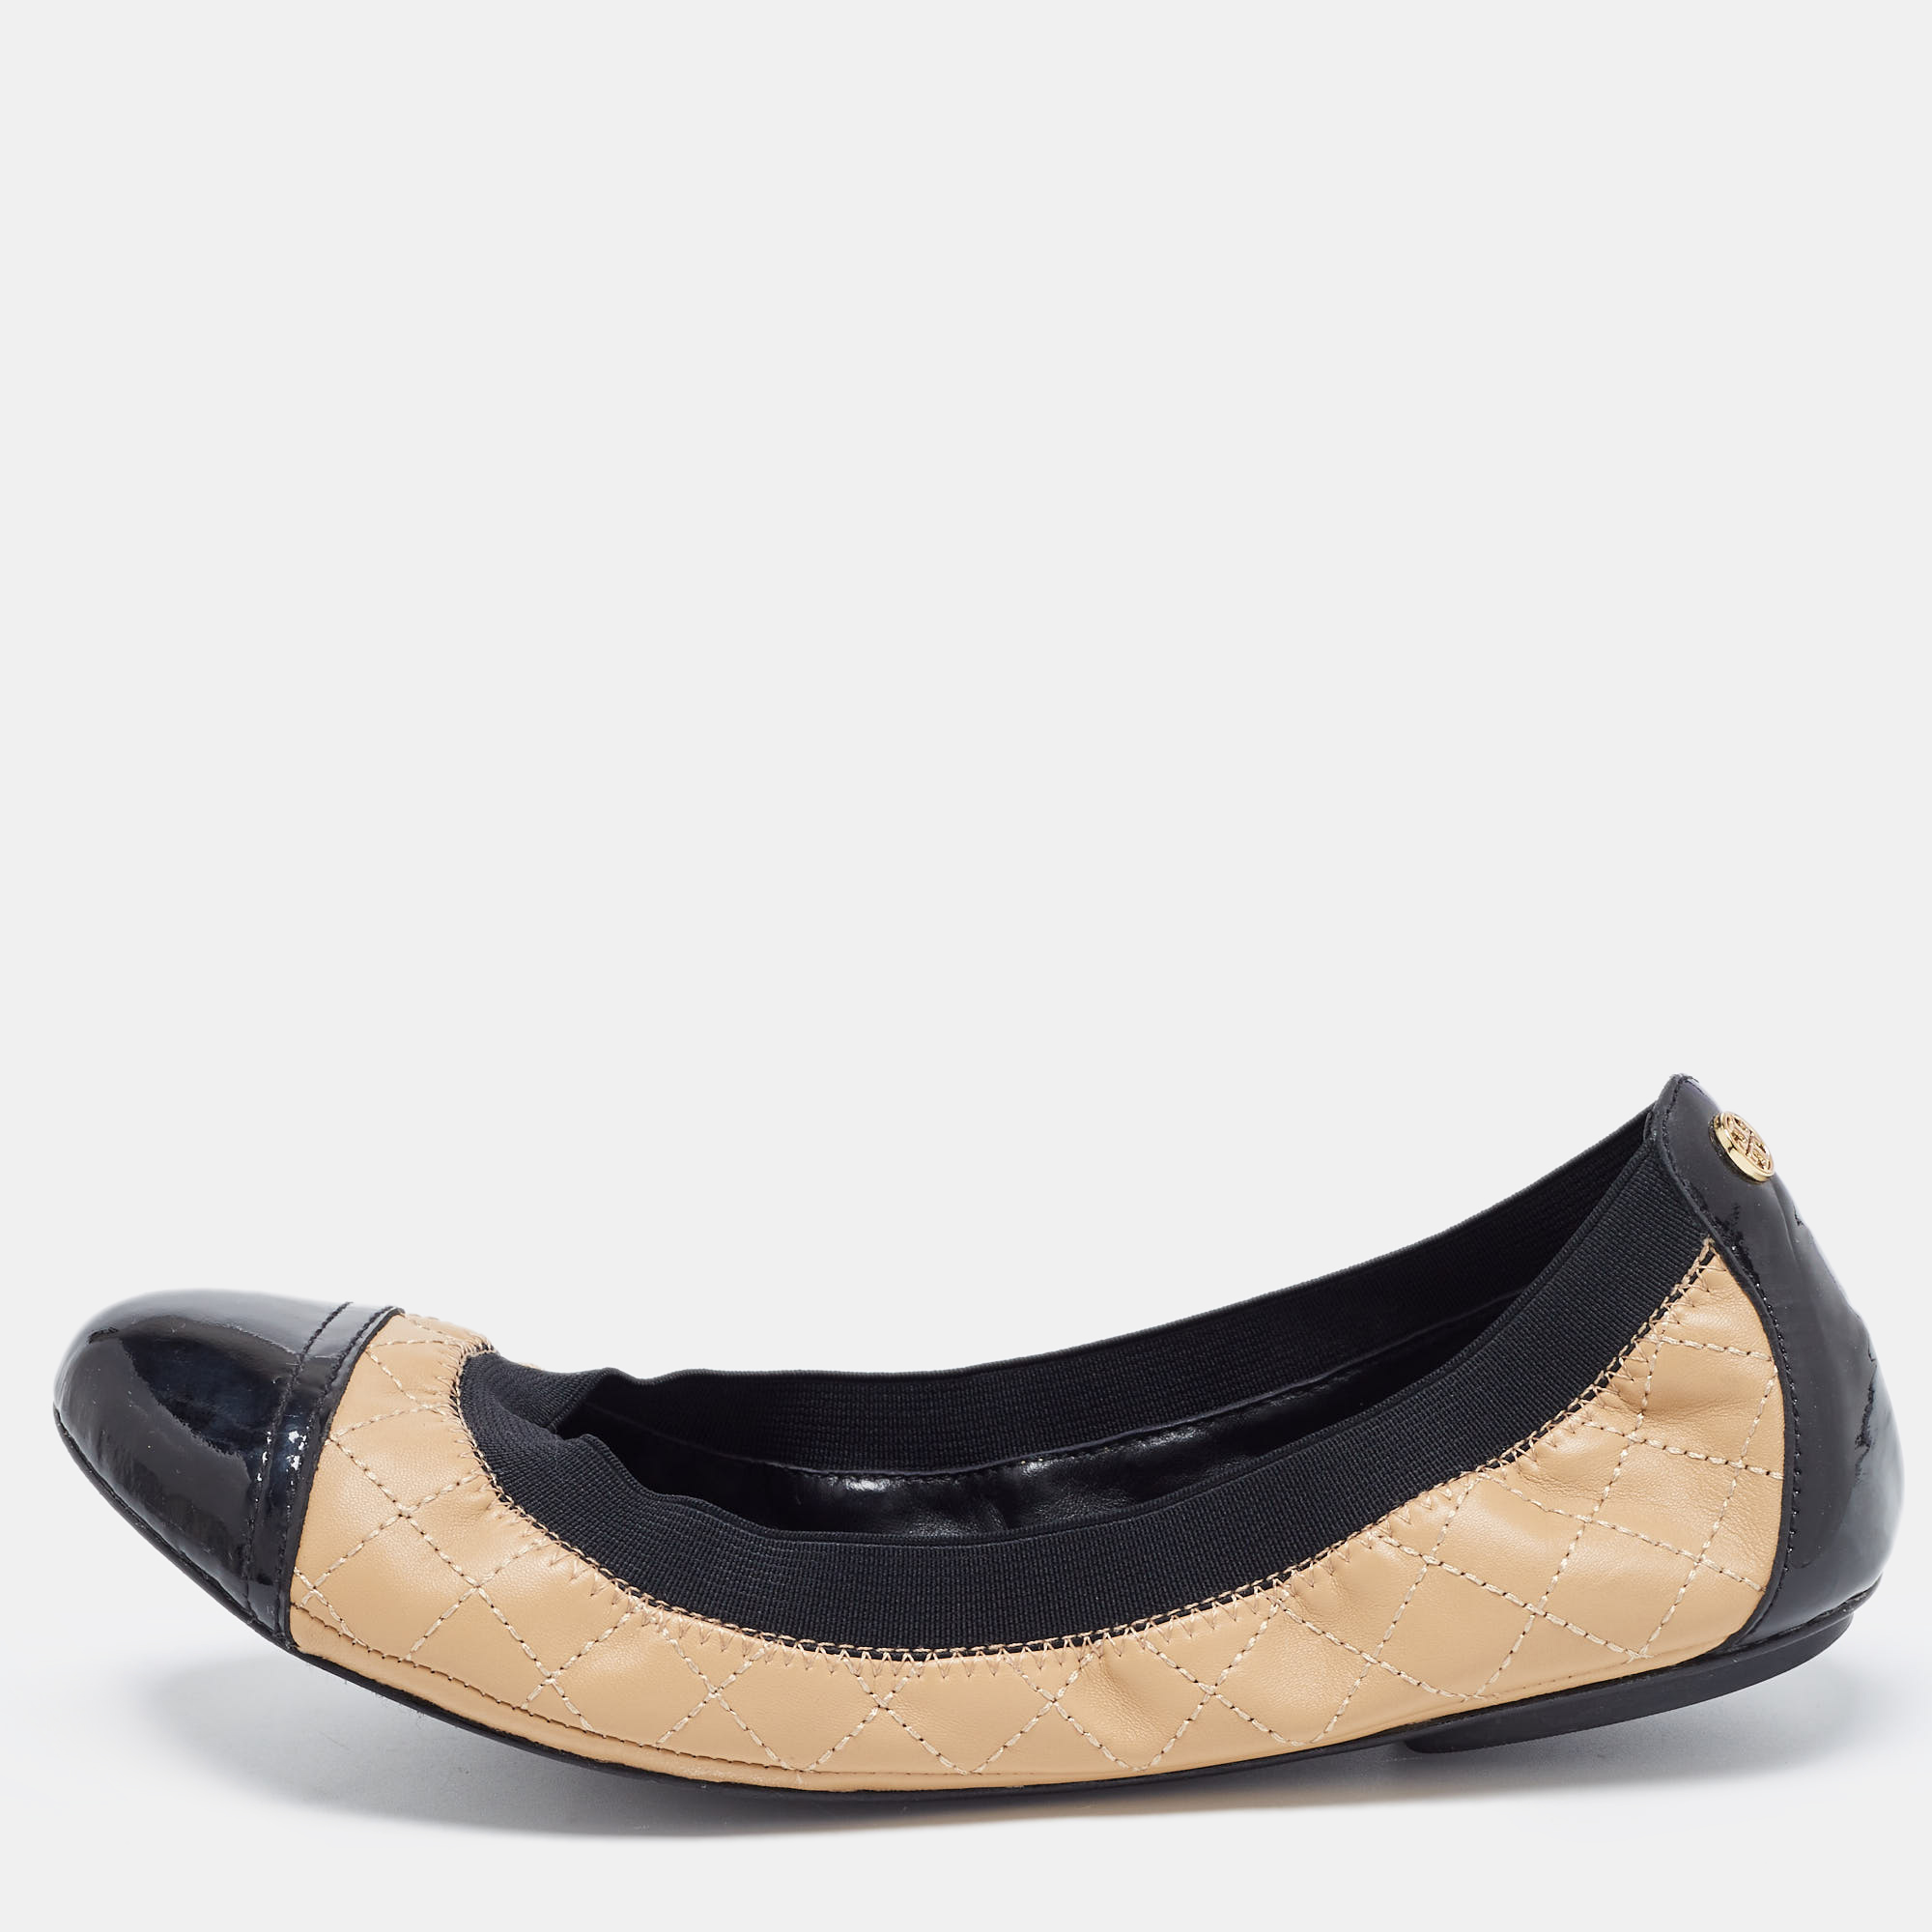 Tory burch beige/black patent and leather quilted detail scrunch ballet flats size 38.5